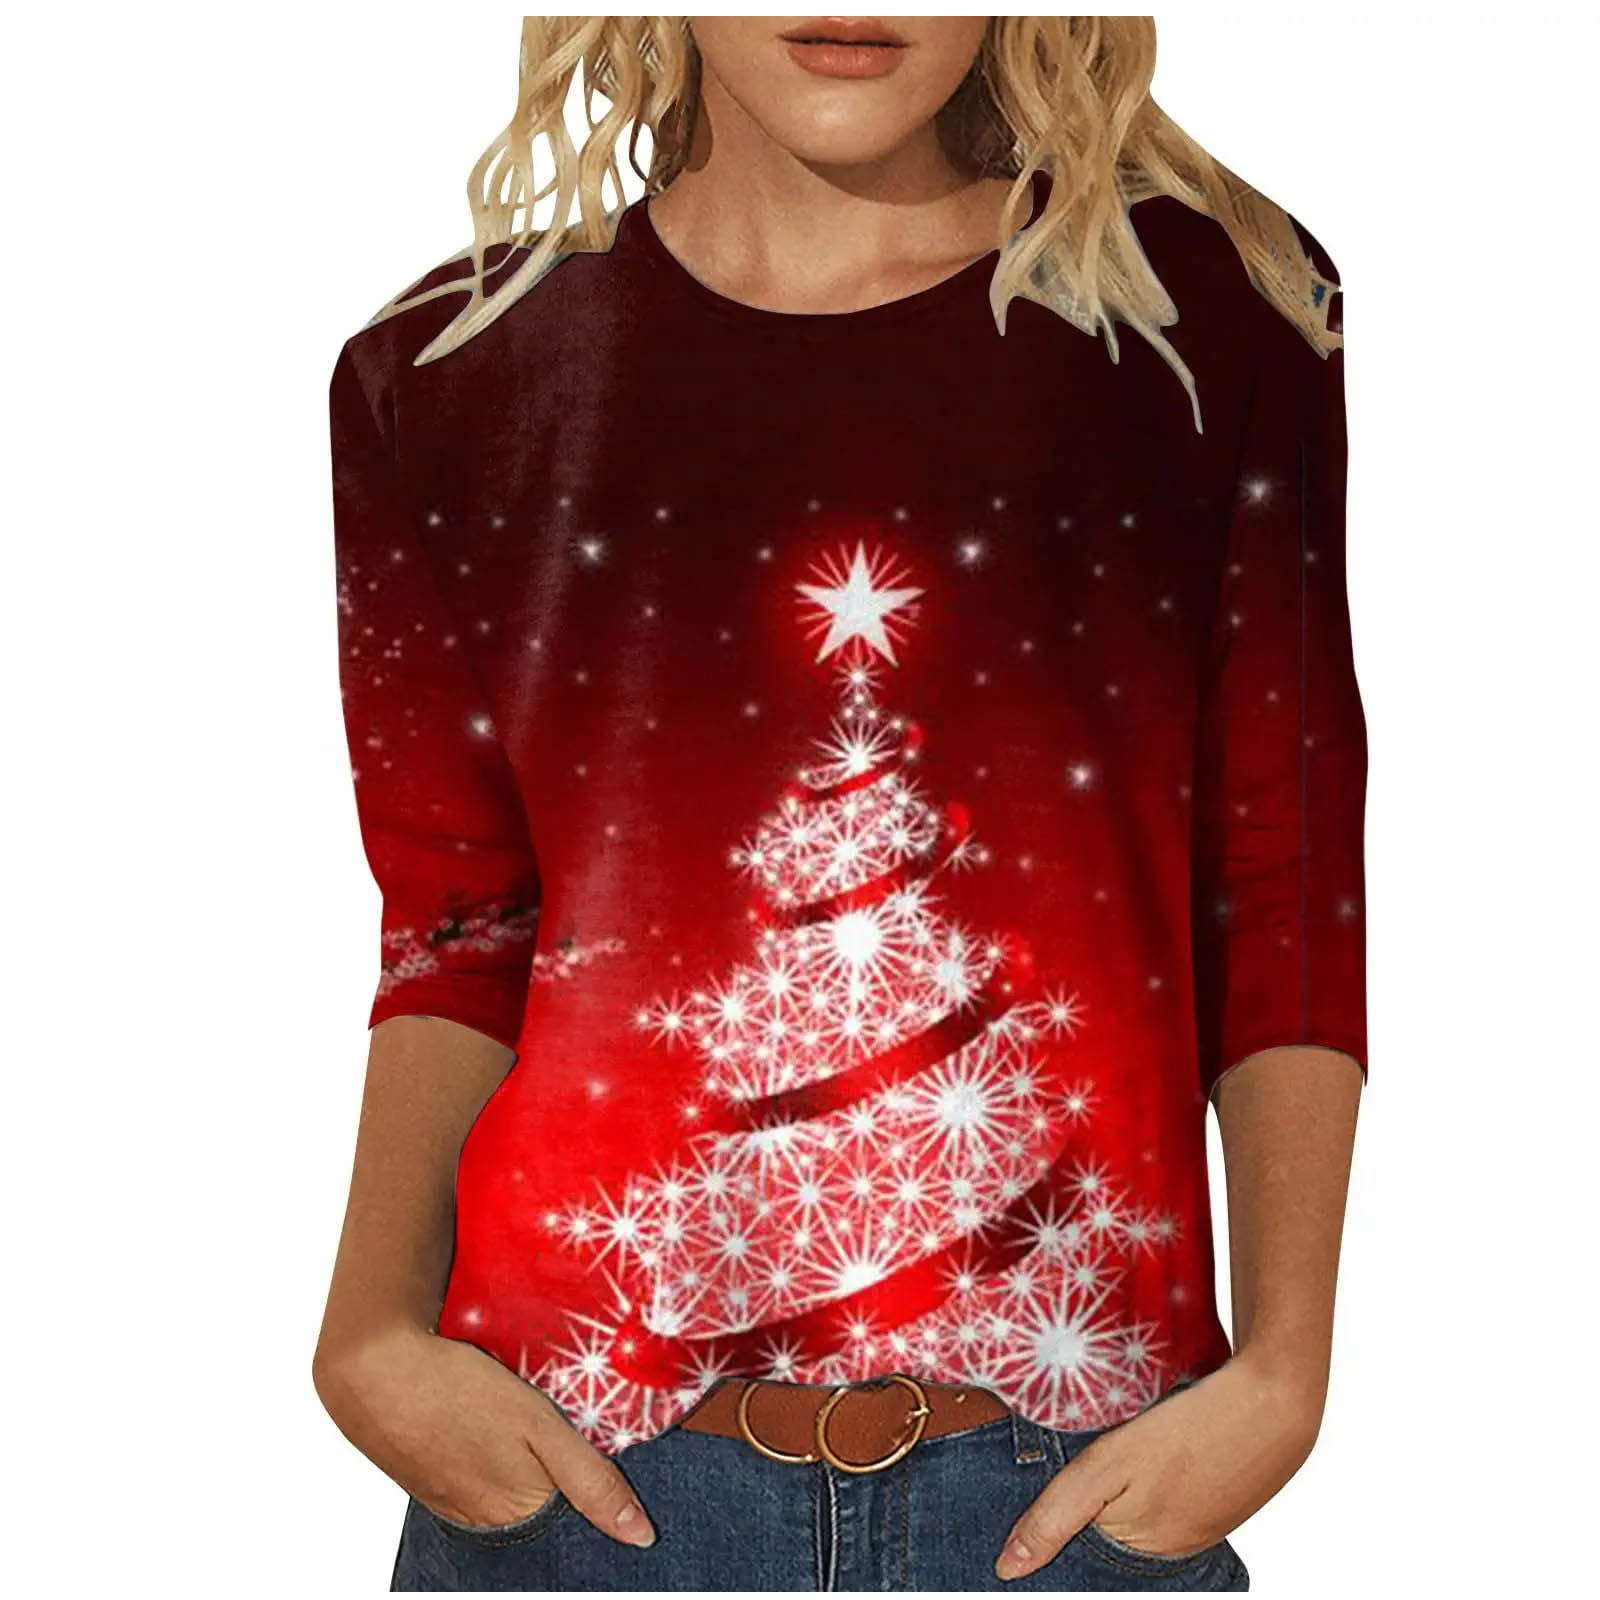 Womens 3/4 Sleeve Tops Christmas Shirts Dressy to Wear with Leggings ...